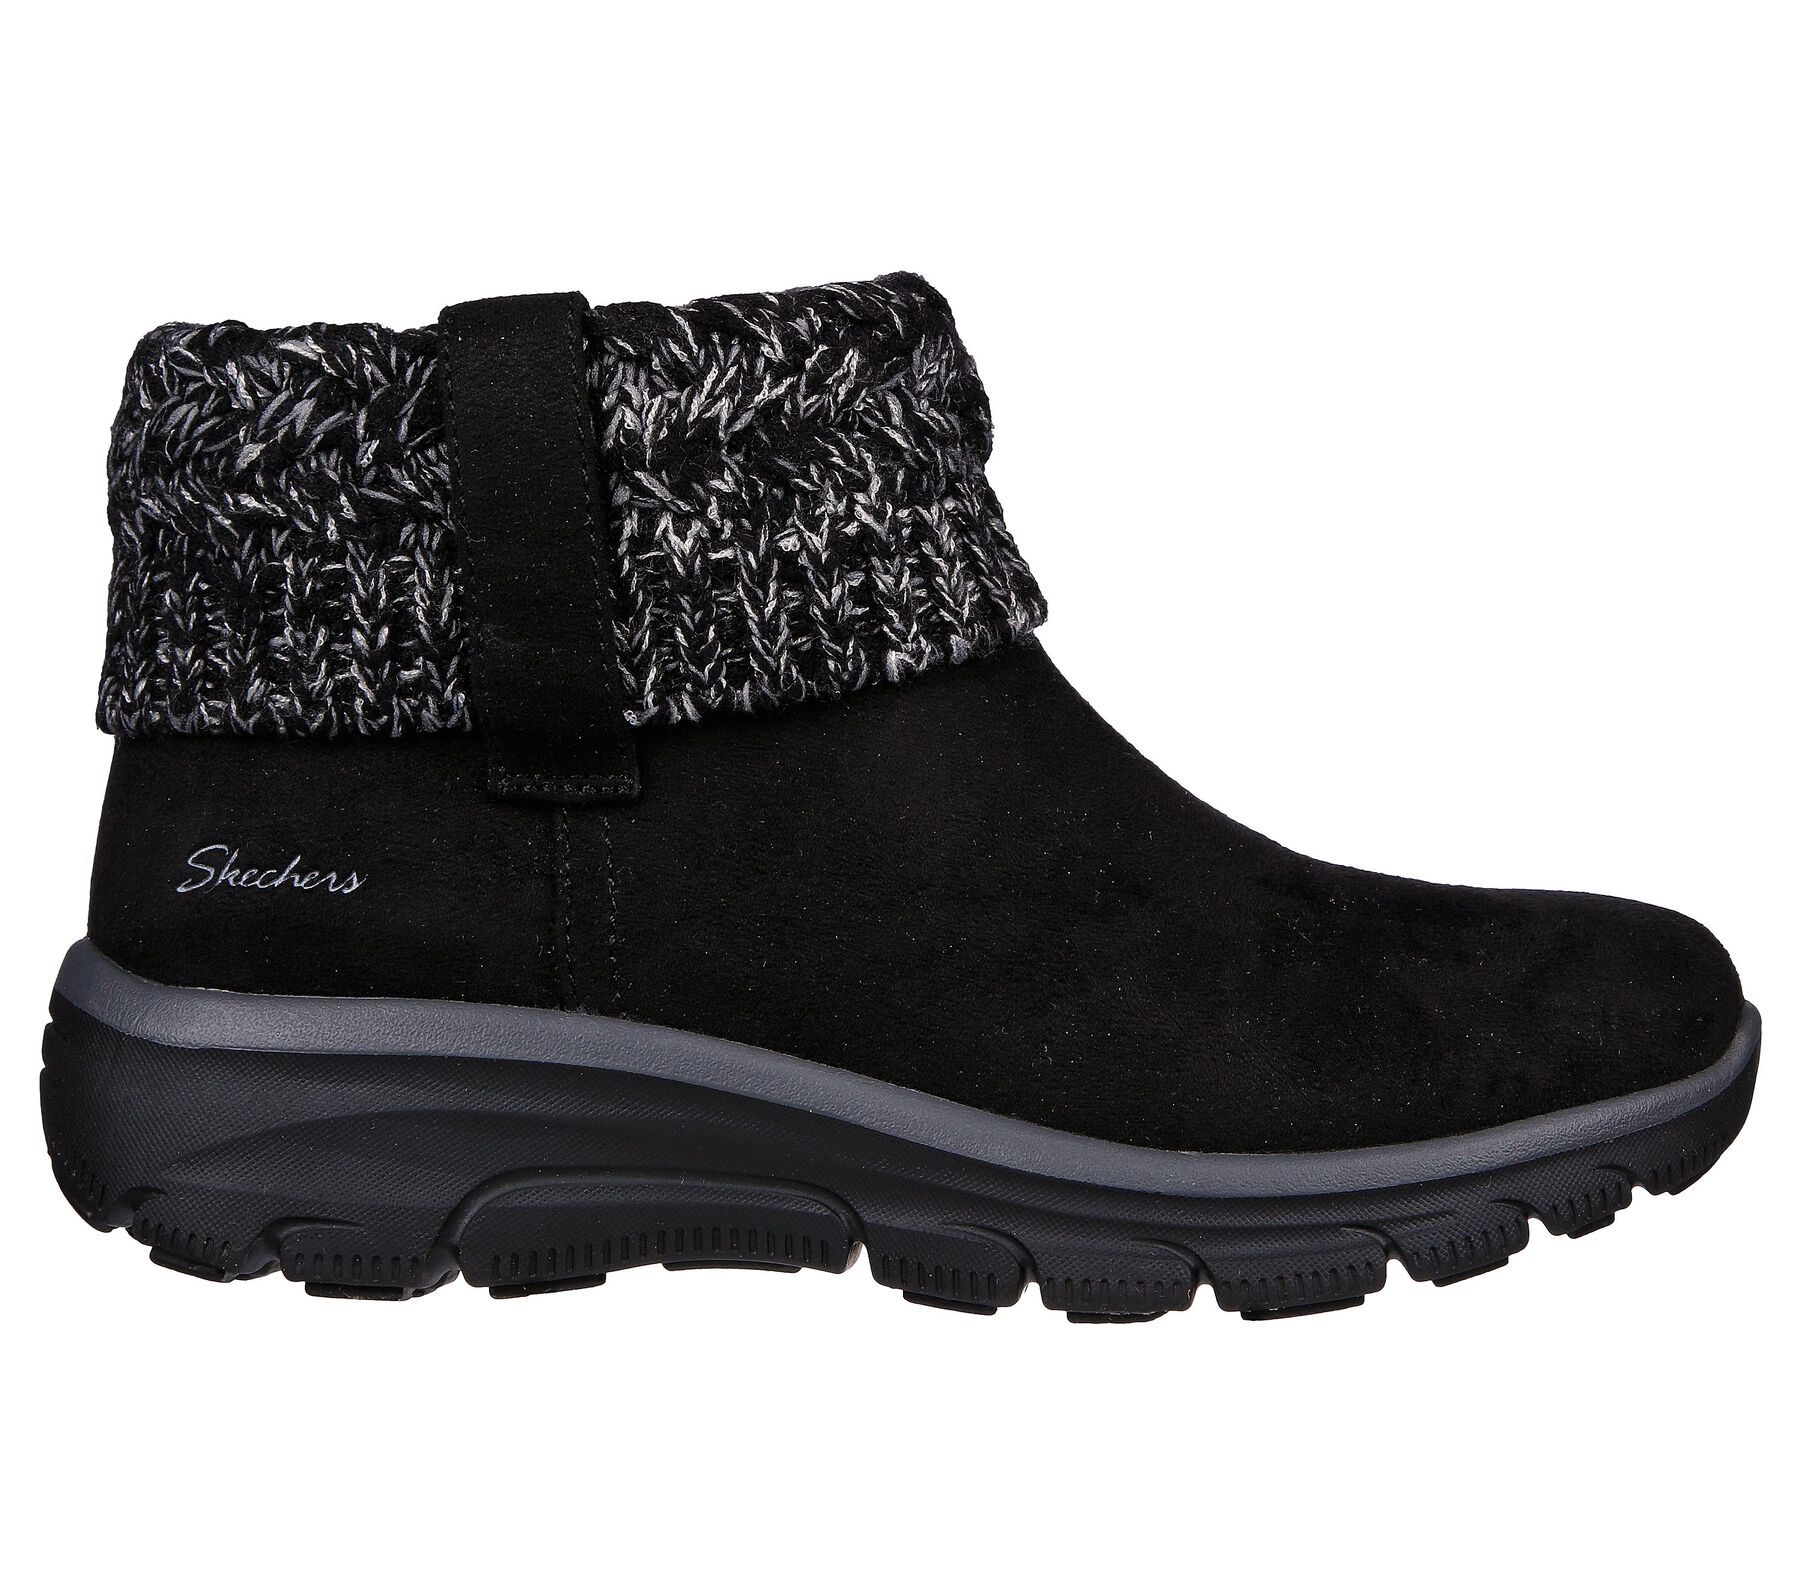 Shop The Relaxed Fit Easy Going Cozy Weather Skechers Ca